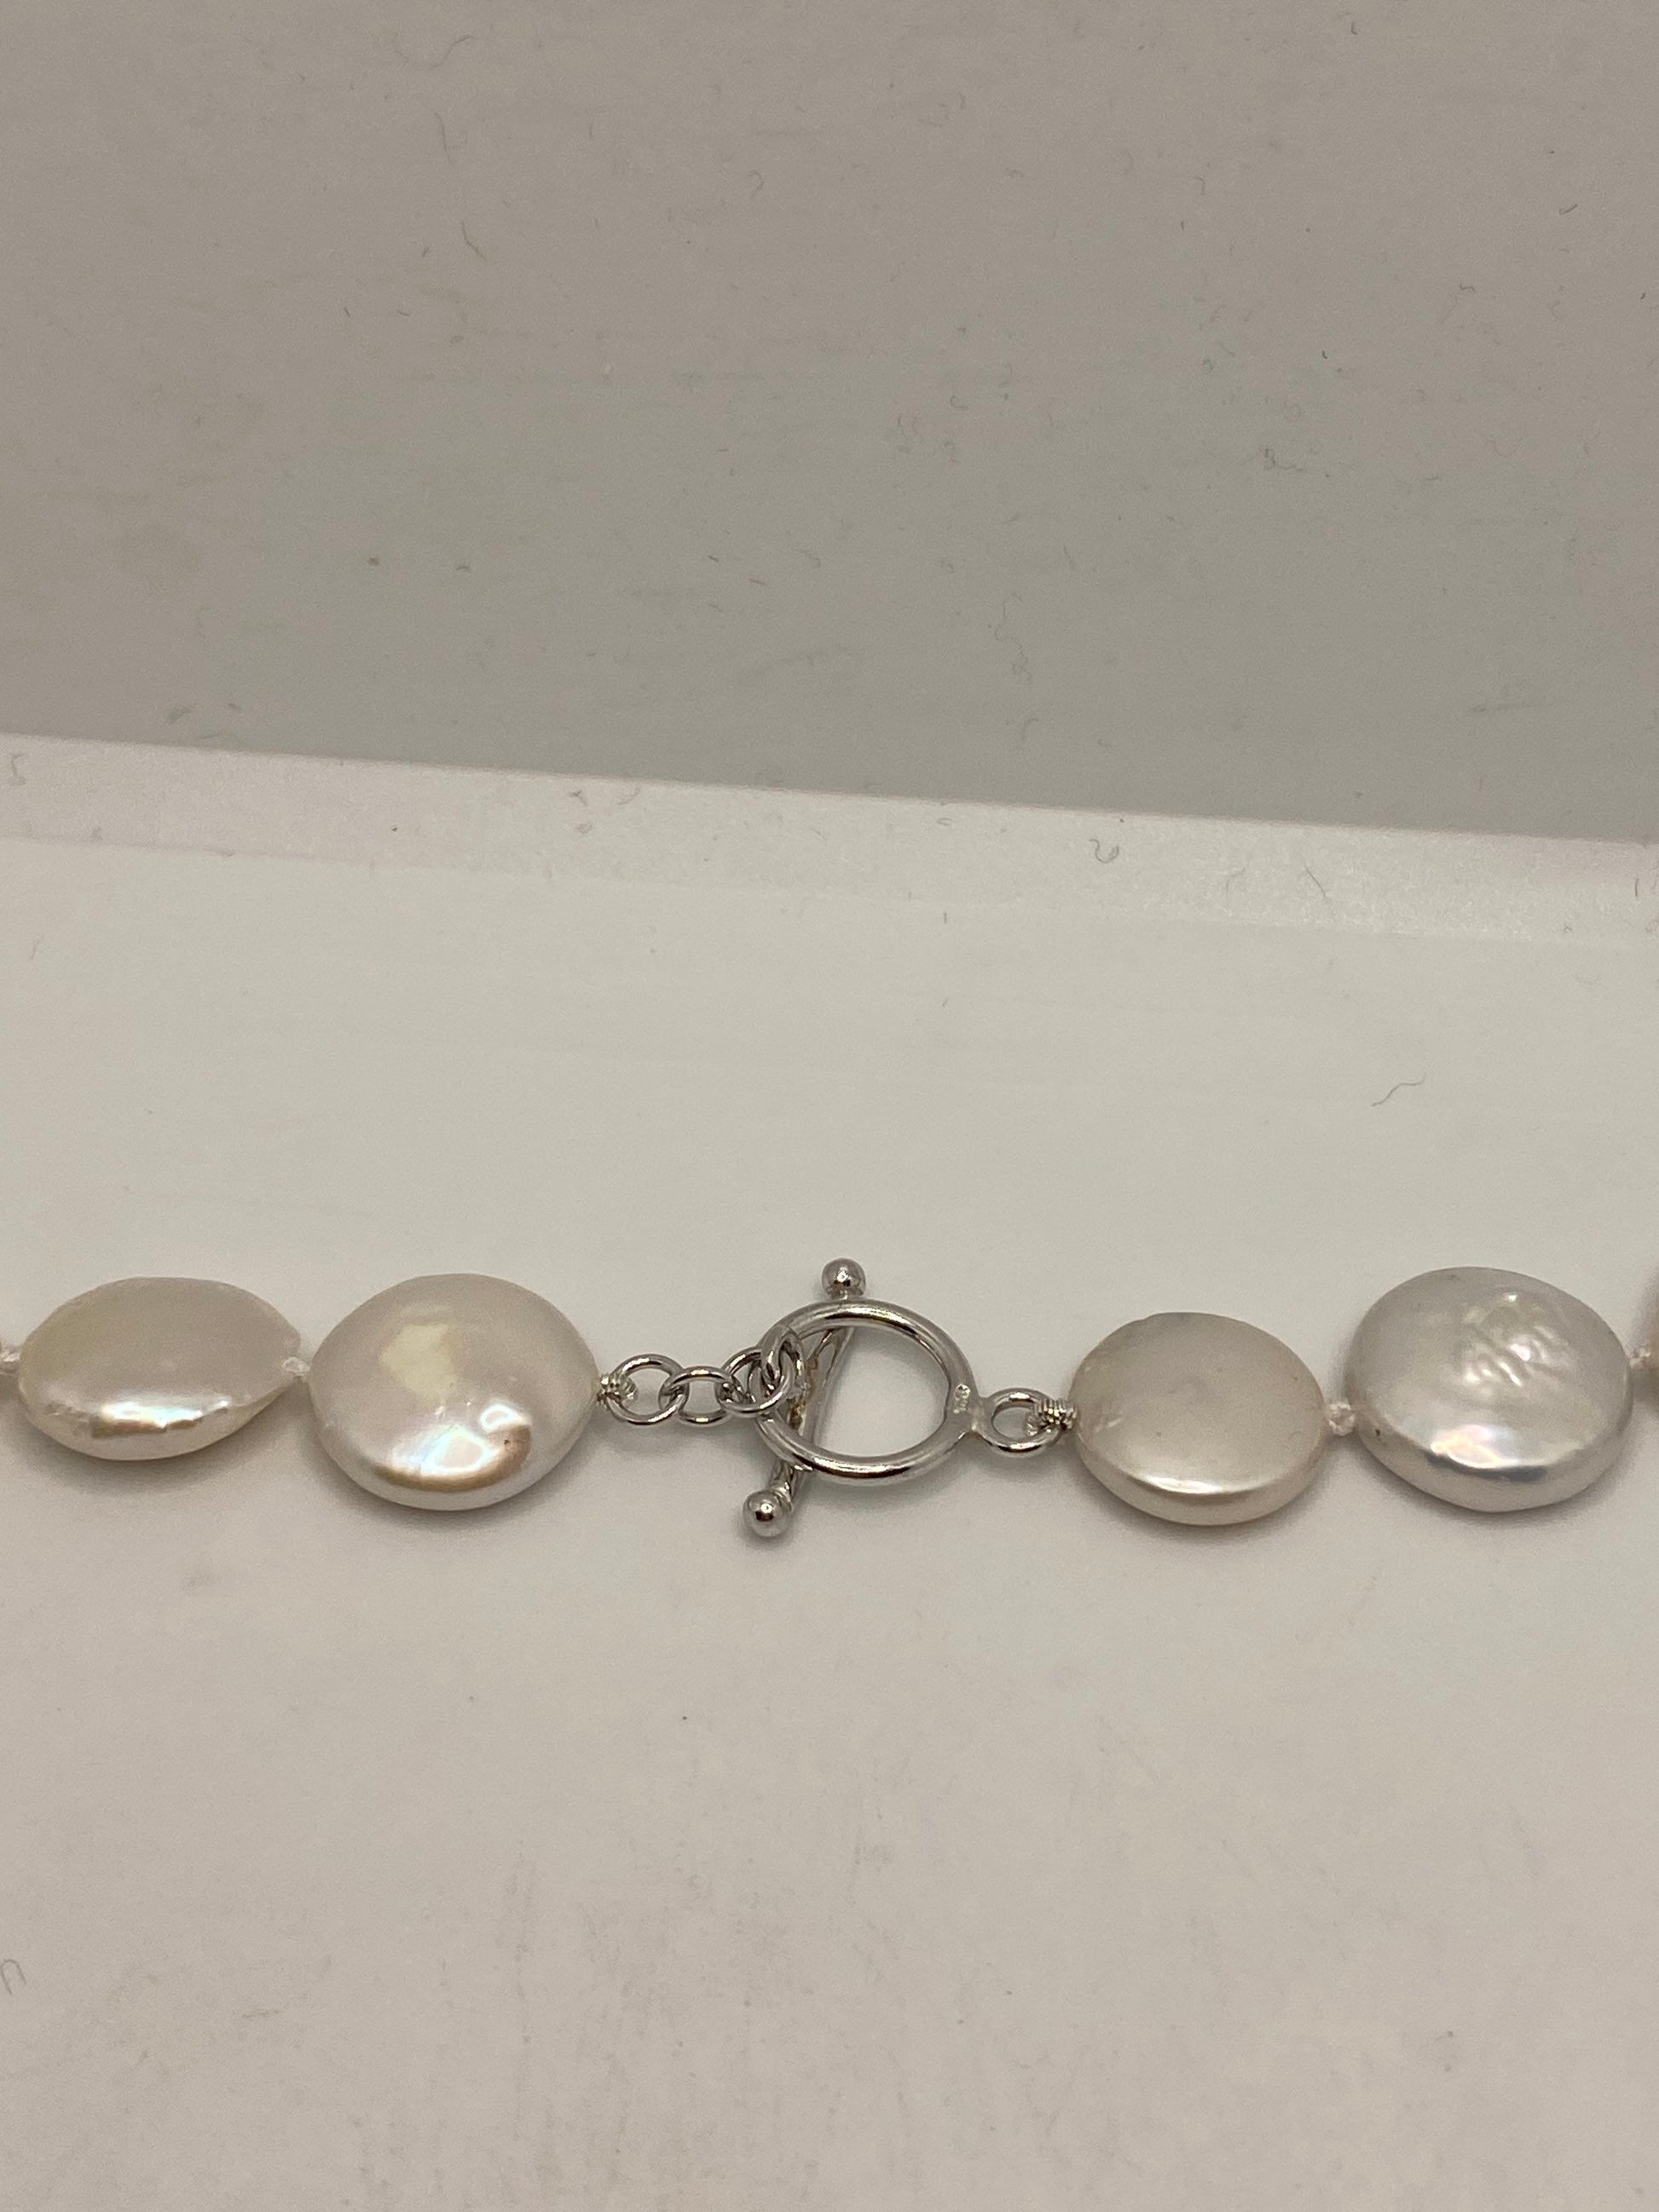 Vintage Hand Knotted Cream Coin Pearl 18 in Necklace